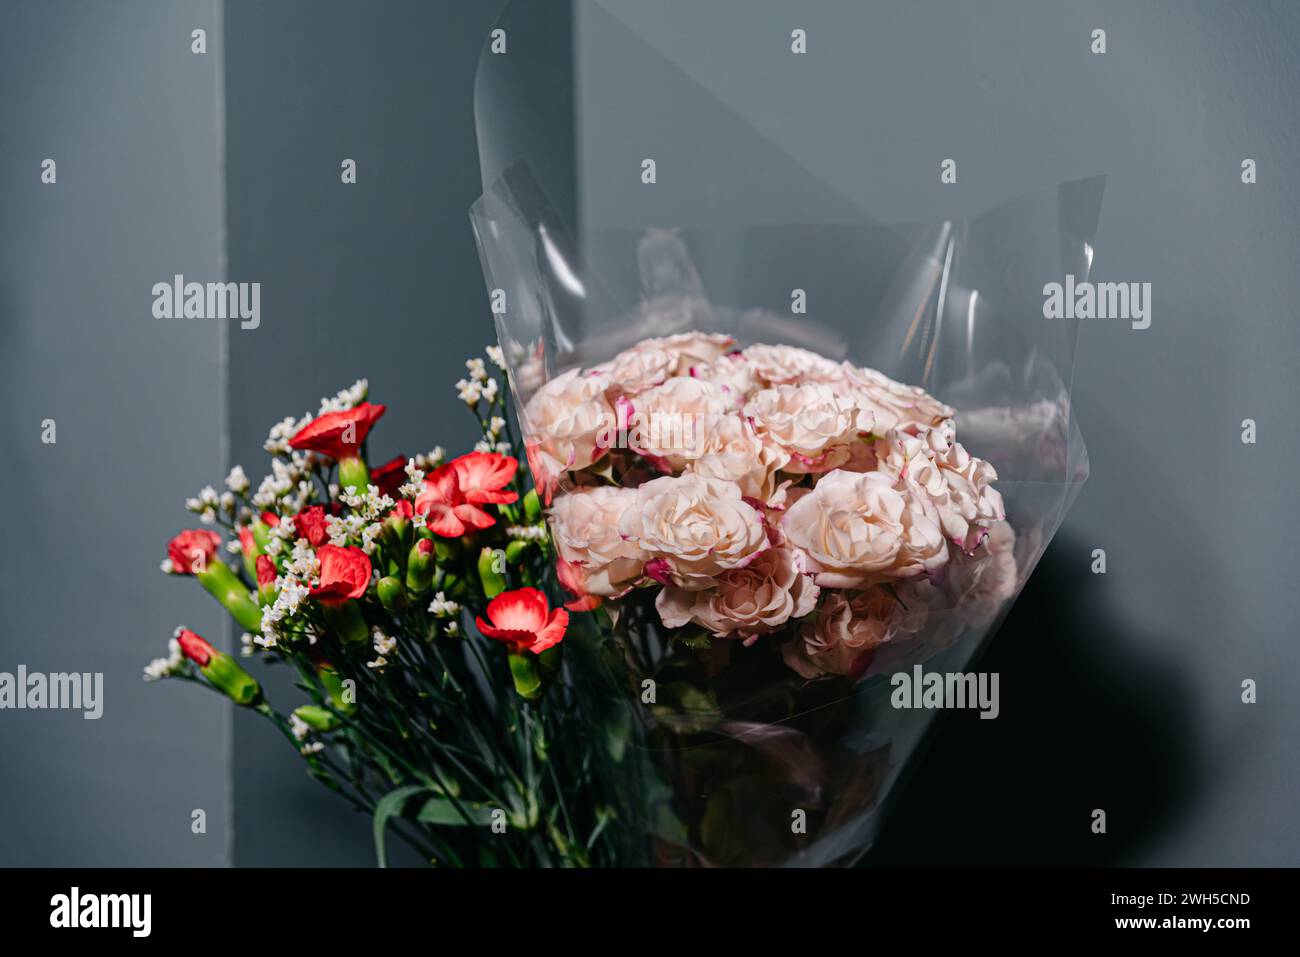 Delicate pink roses and vibrant red carnations wrapped in a clear film, casting a soft shadow on a gray background. Stock Photo